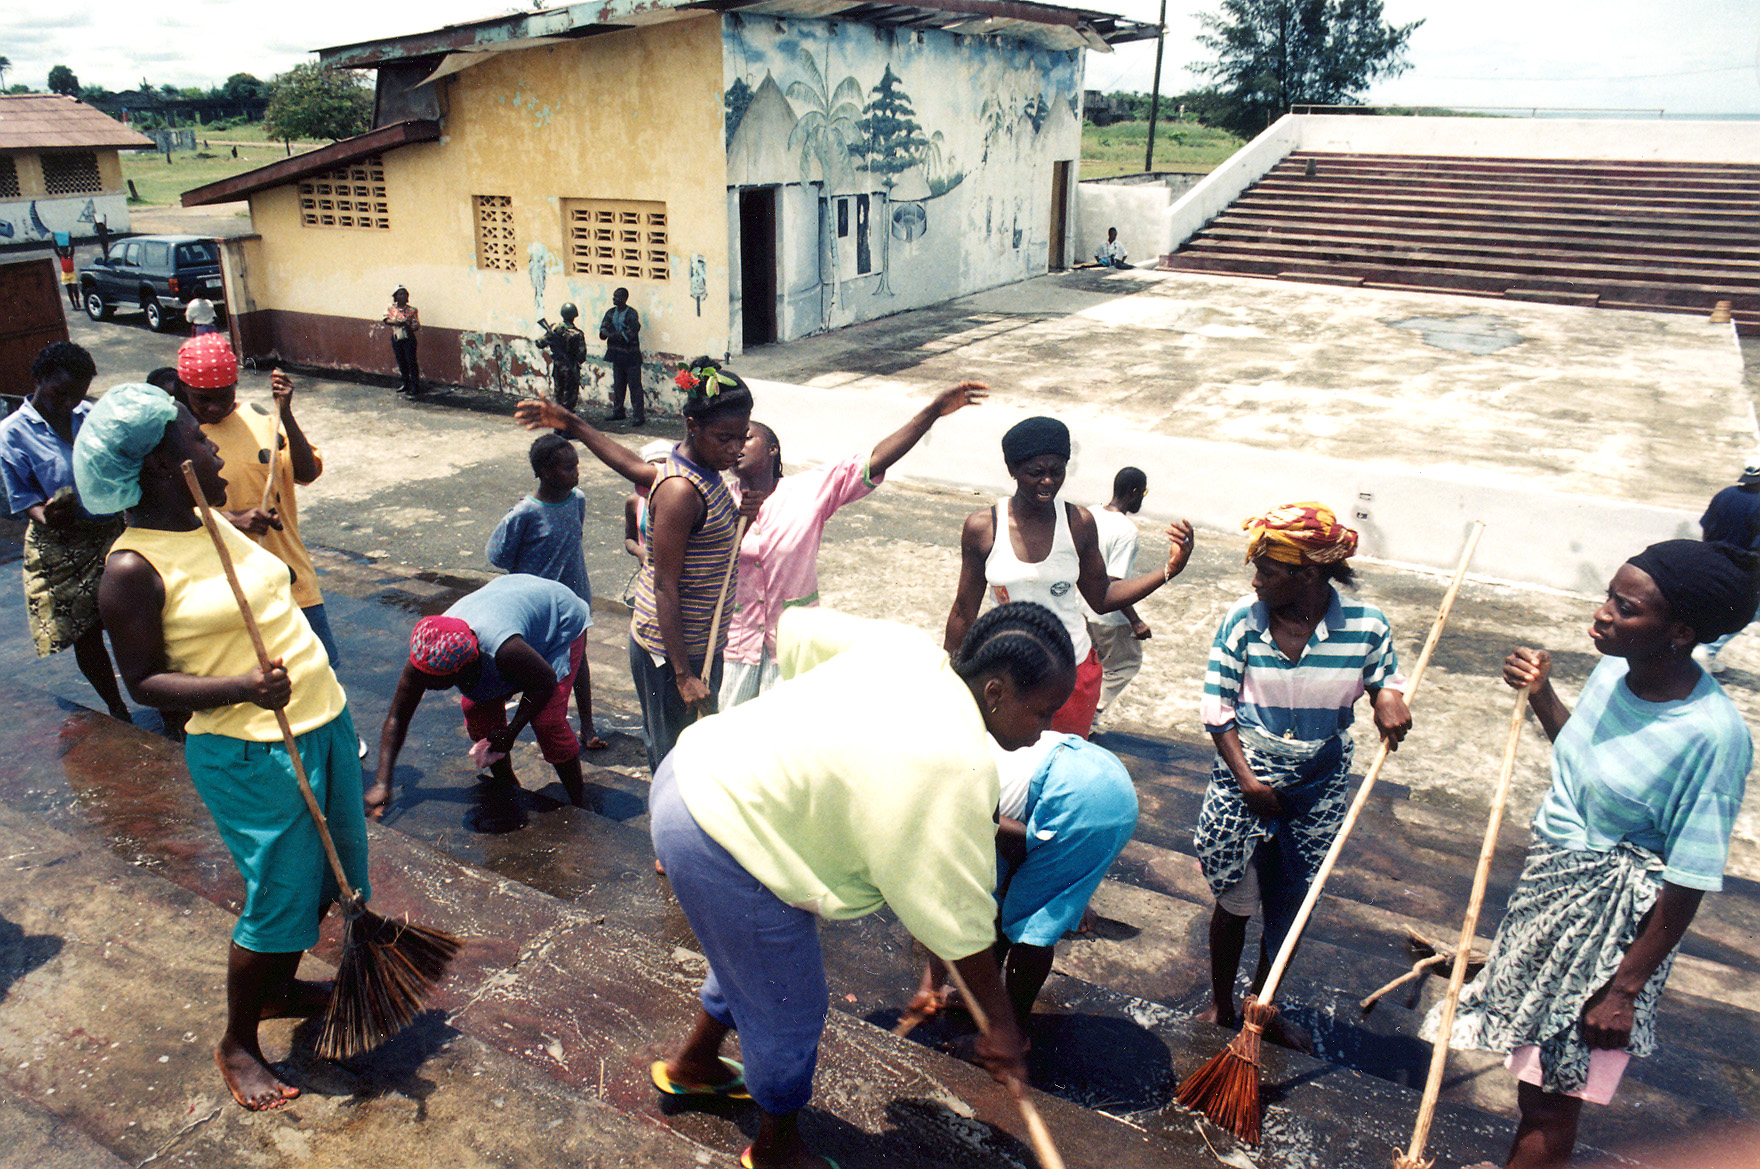 A group of people sweeping the ground with brooms.